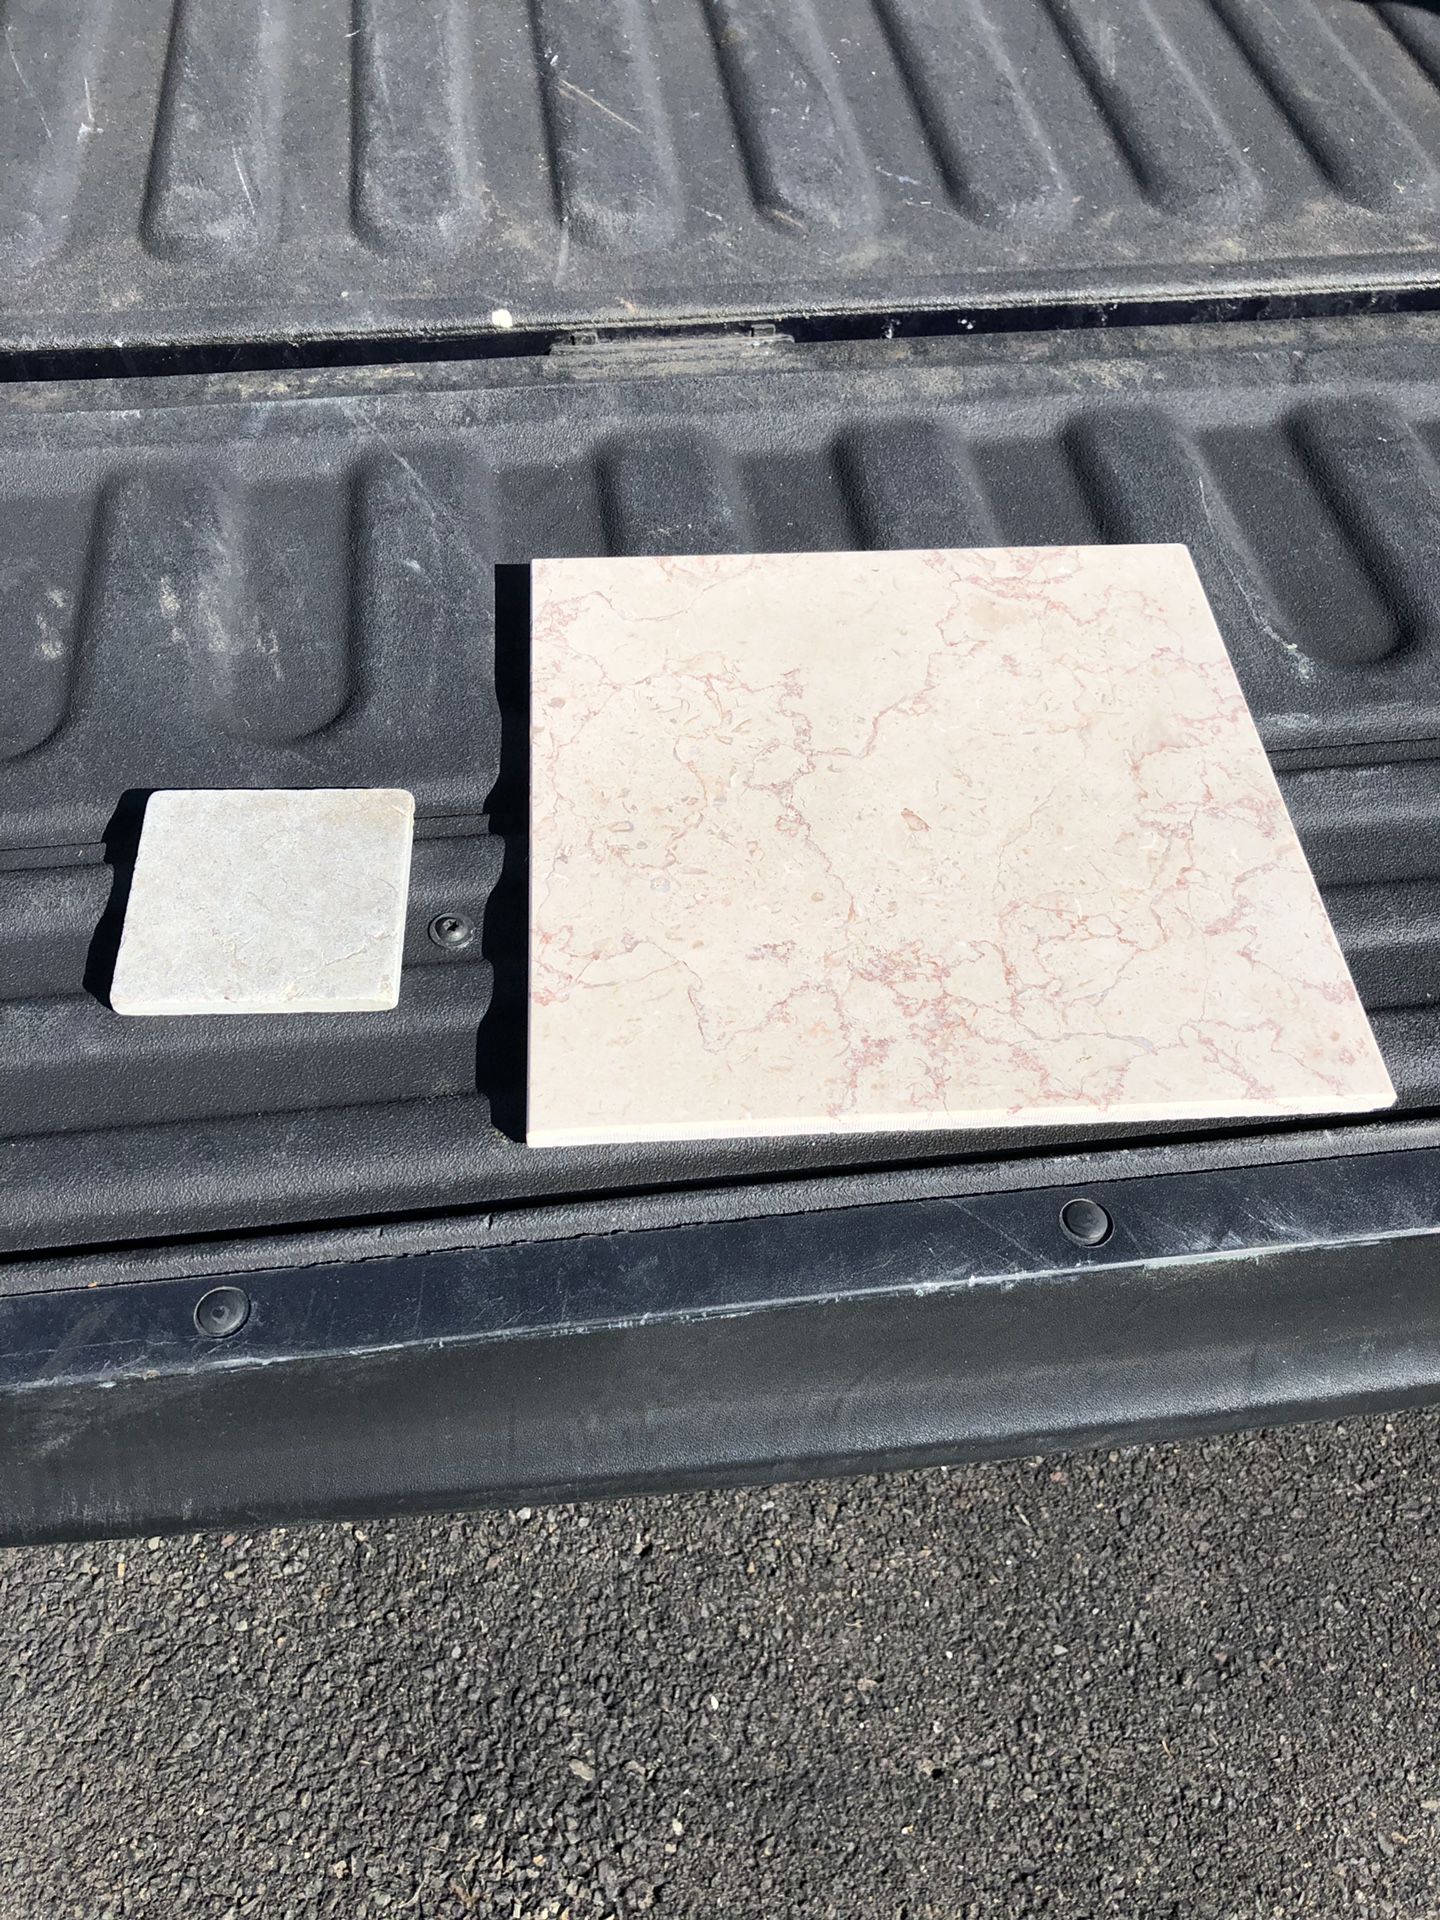 4”x4” and 12”x12” tile